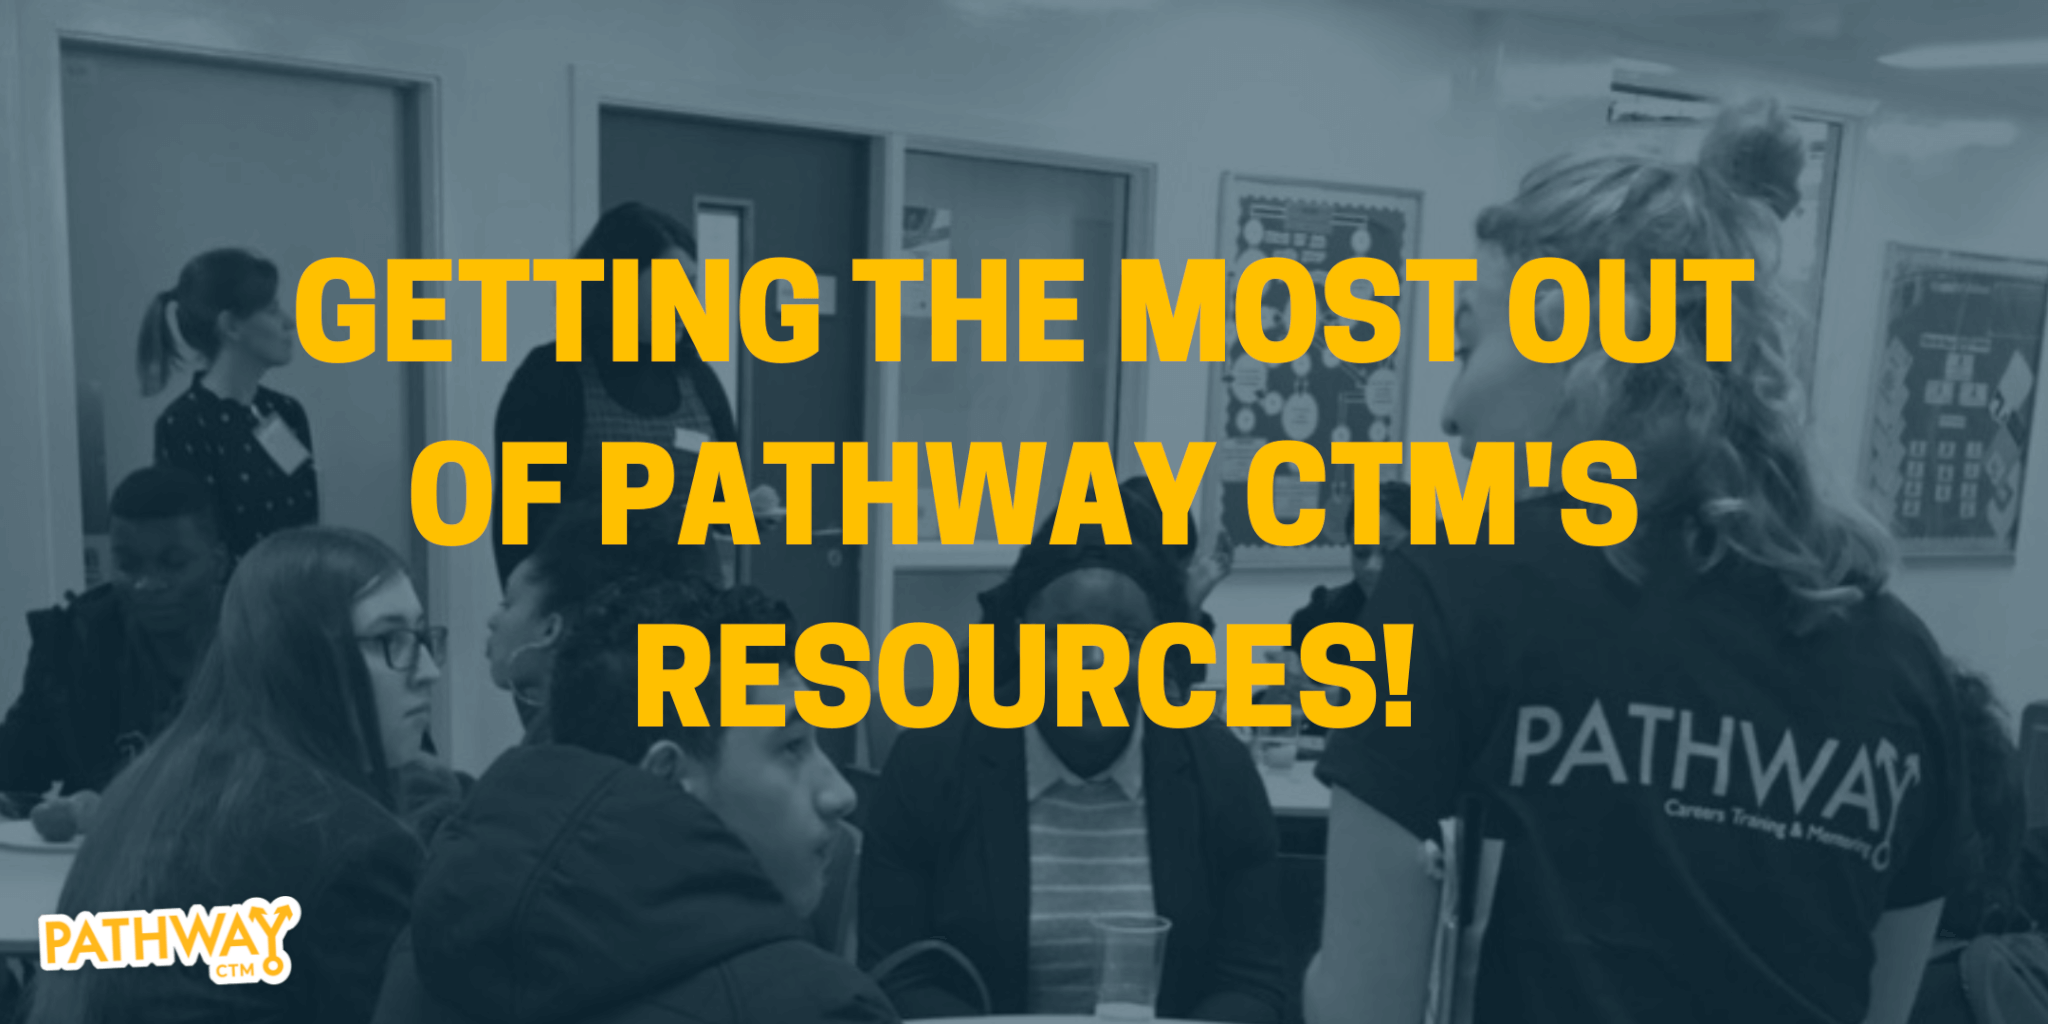 Getting the most out of Pathway CTM’s resources! 💻 ✍️ 📹